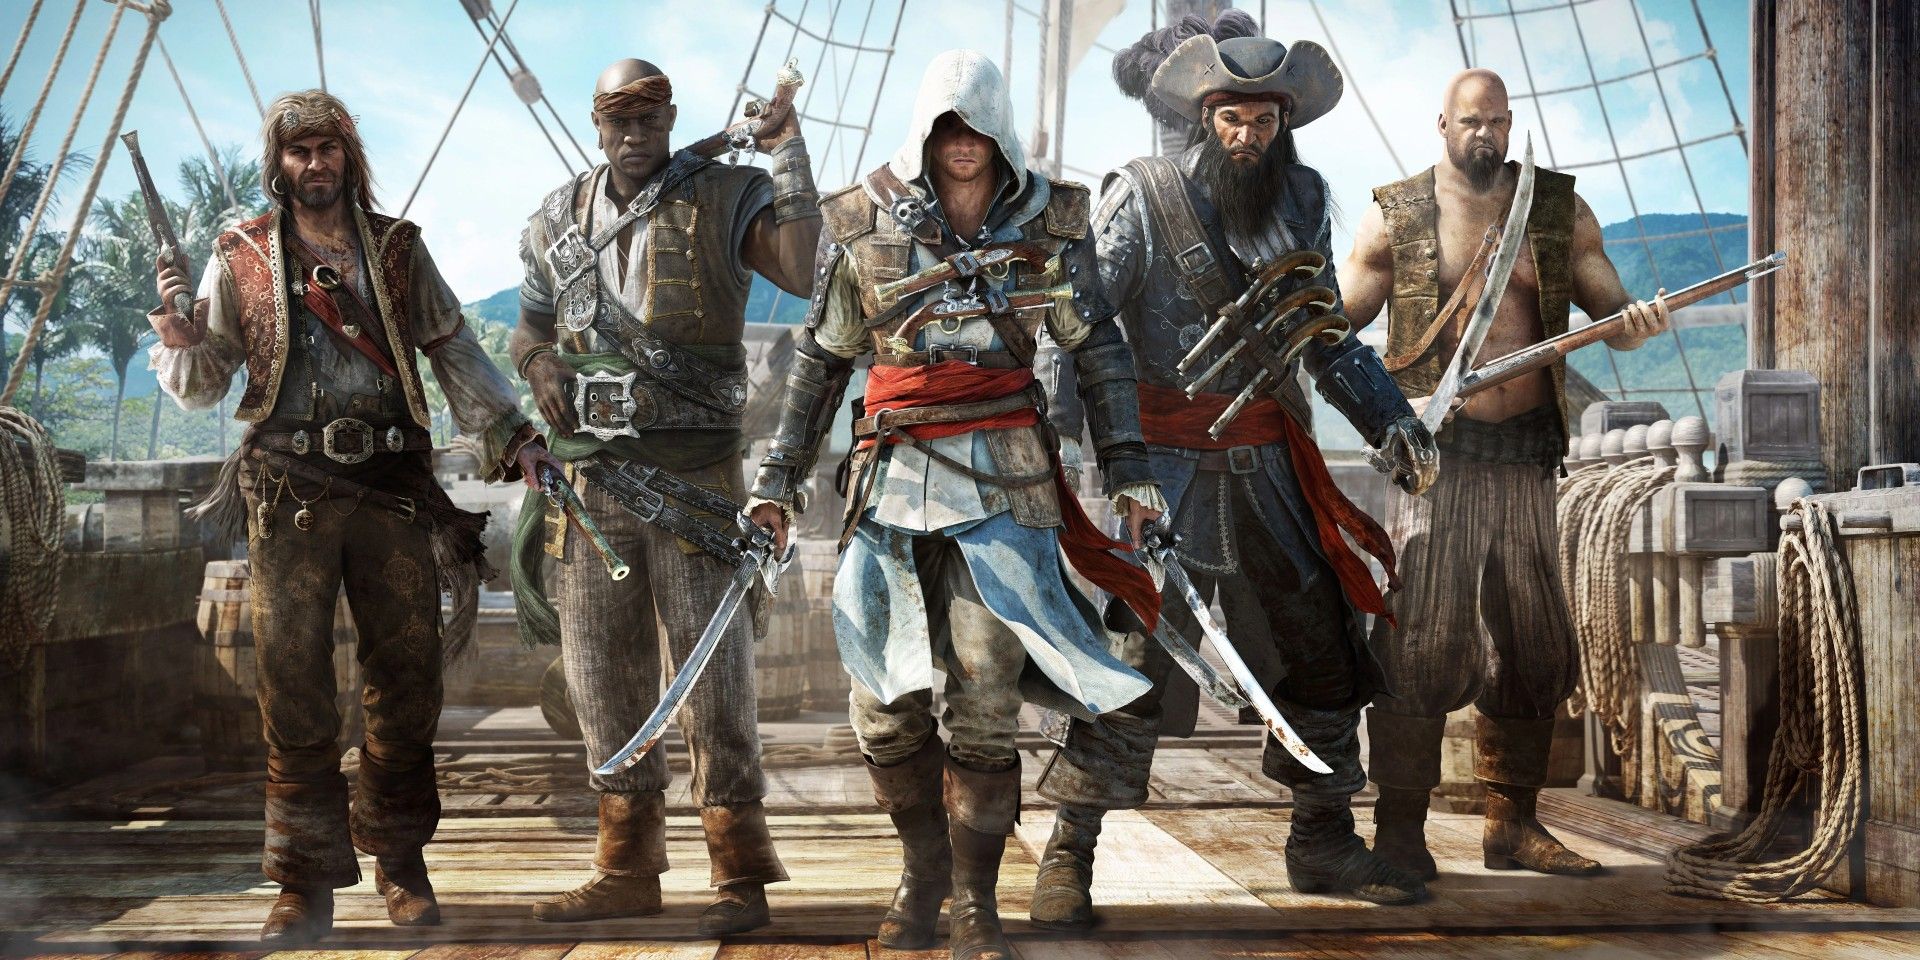 Assassin's Creed IV: Black Flag's Edward Kenway wielding two swords, surrounded by four other pirates on a ship's deck.